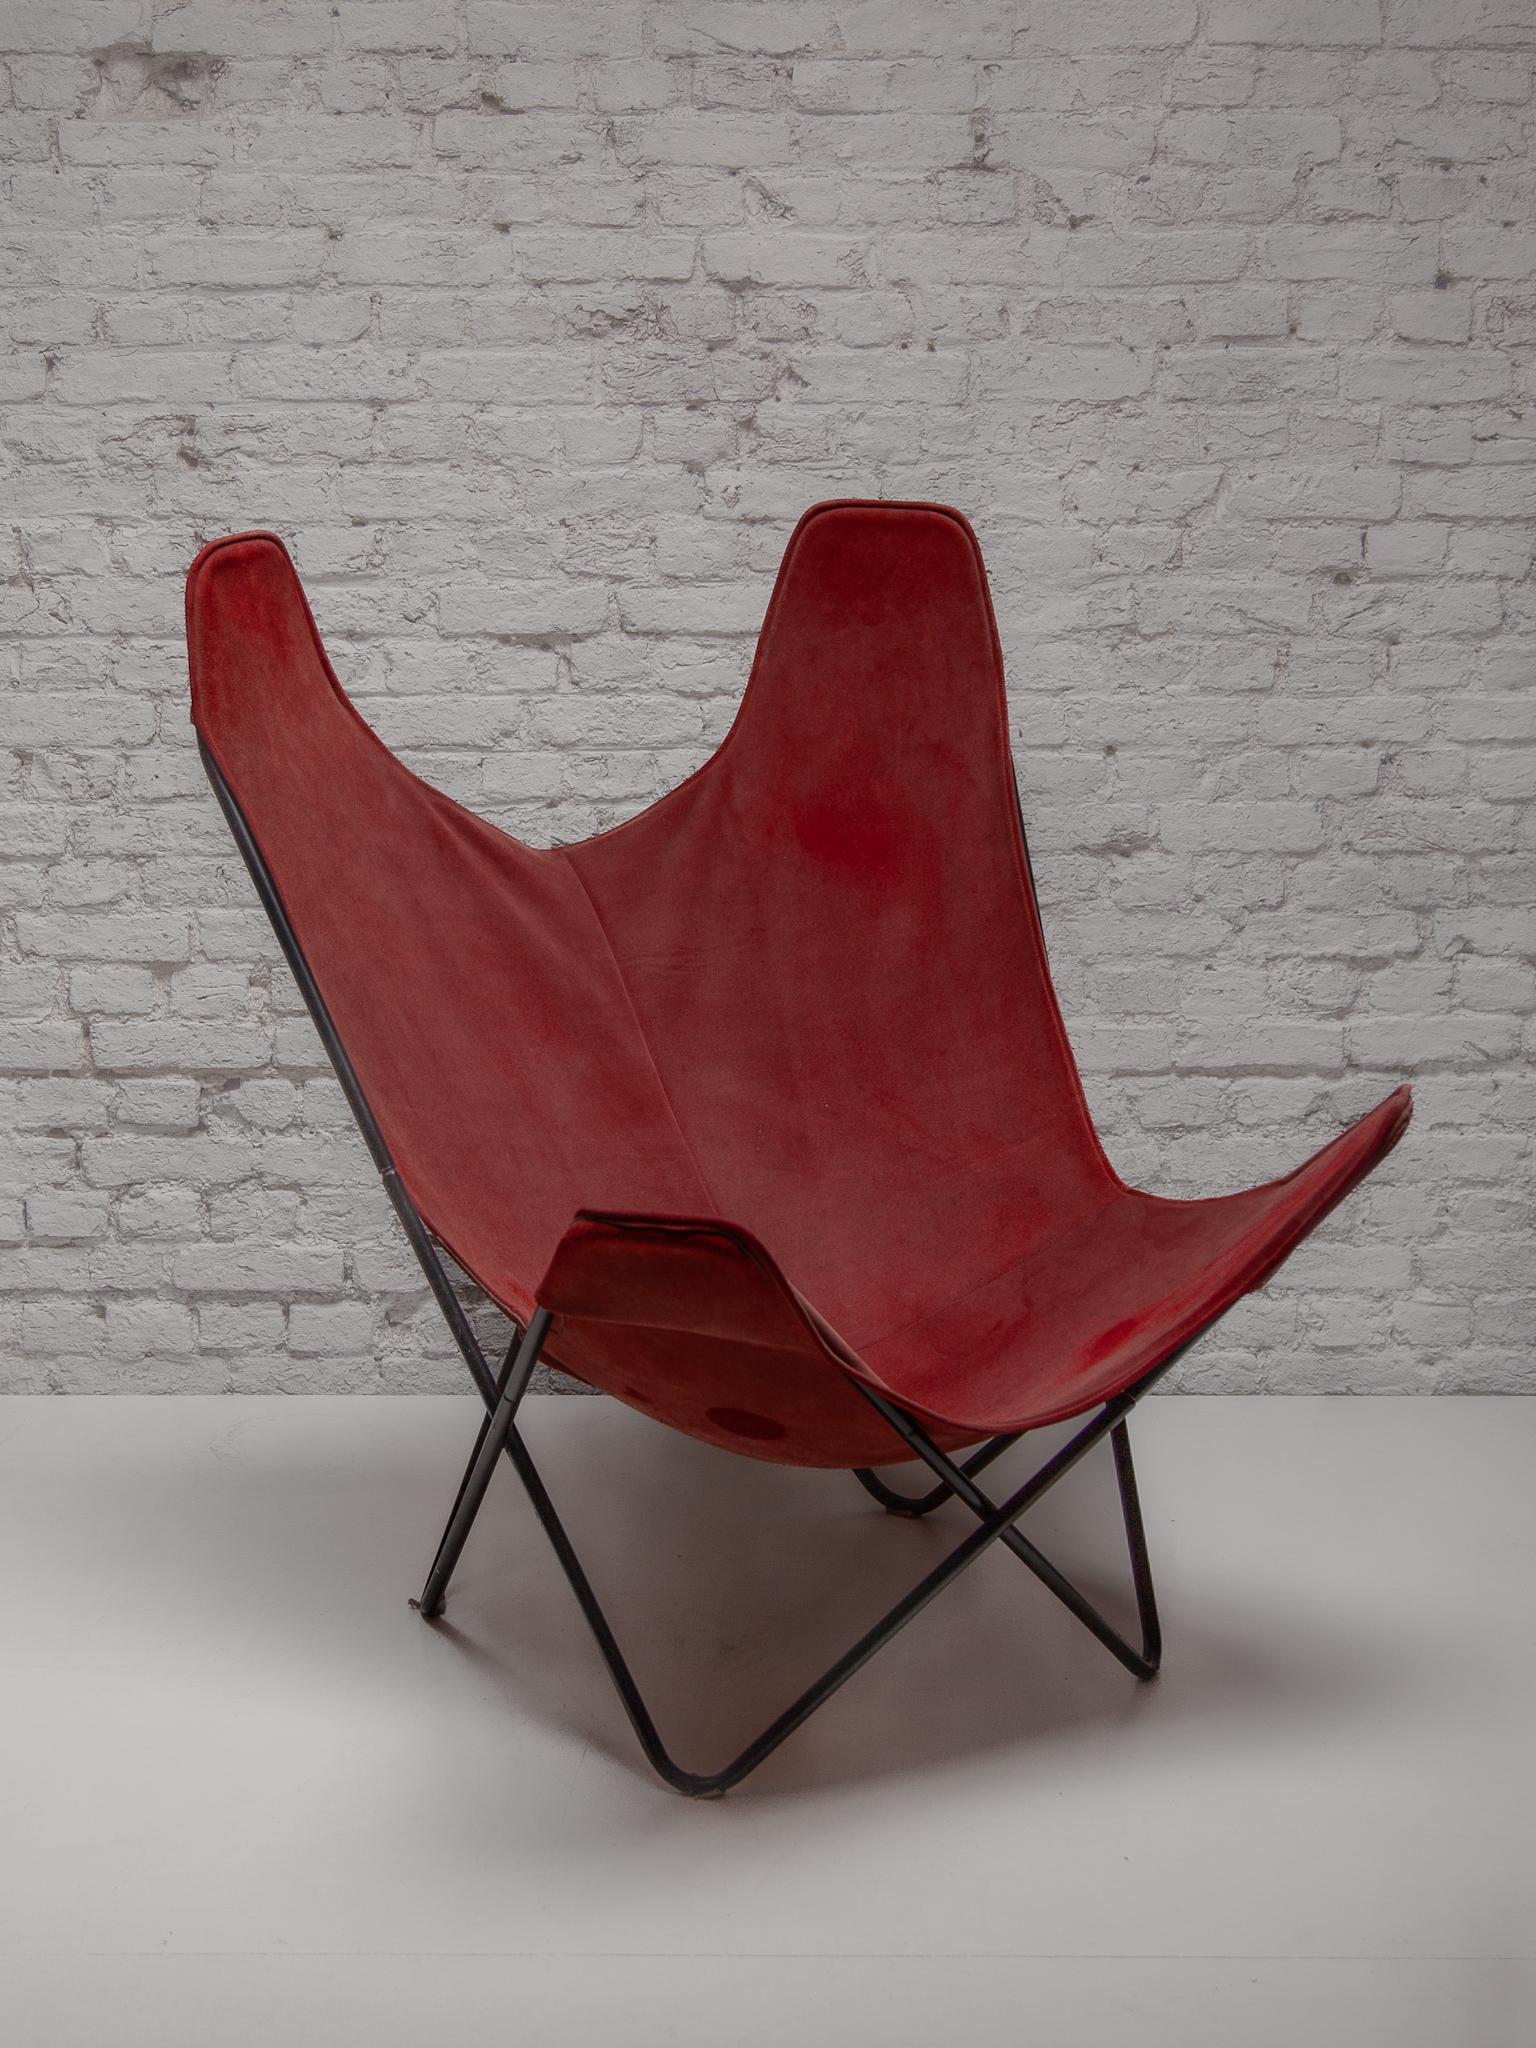 butterfly chair 60s